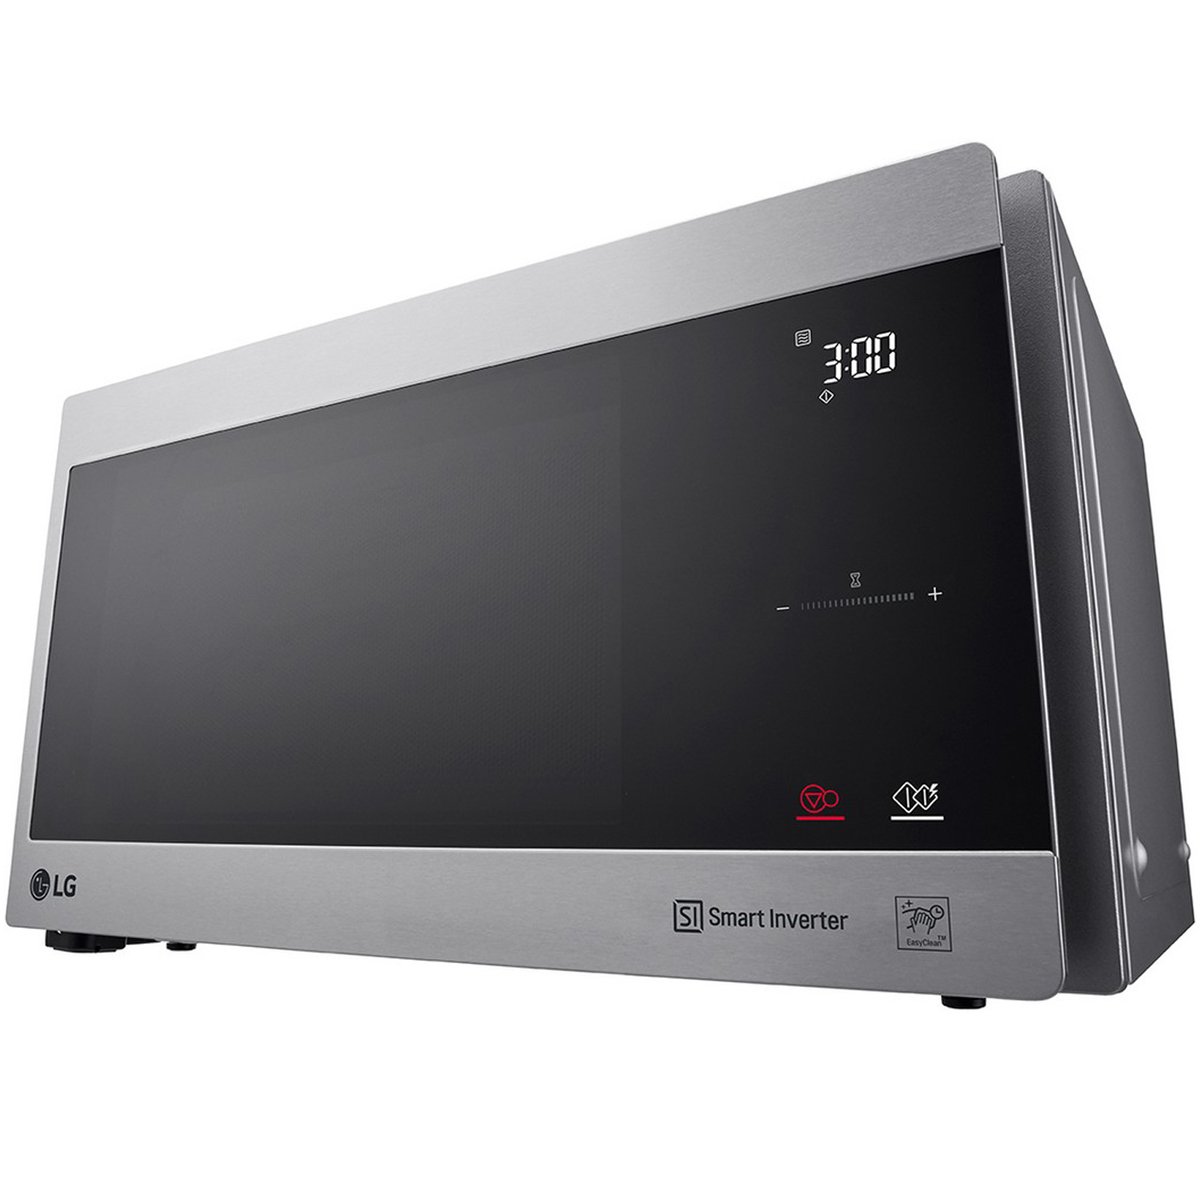 LG Microwave Oven MS4295CIS 42Ltr